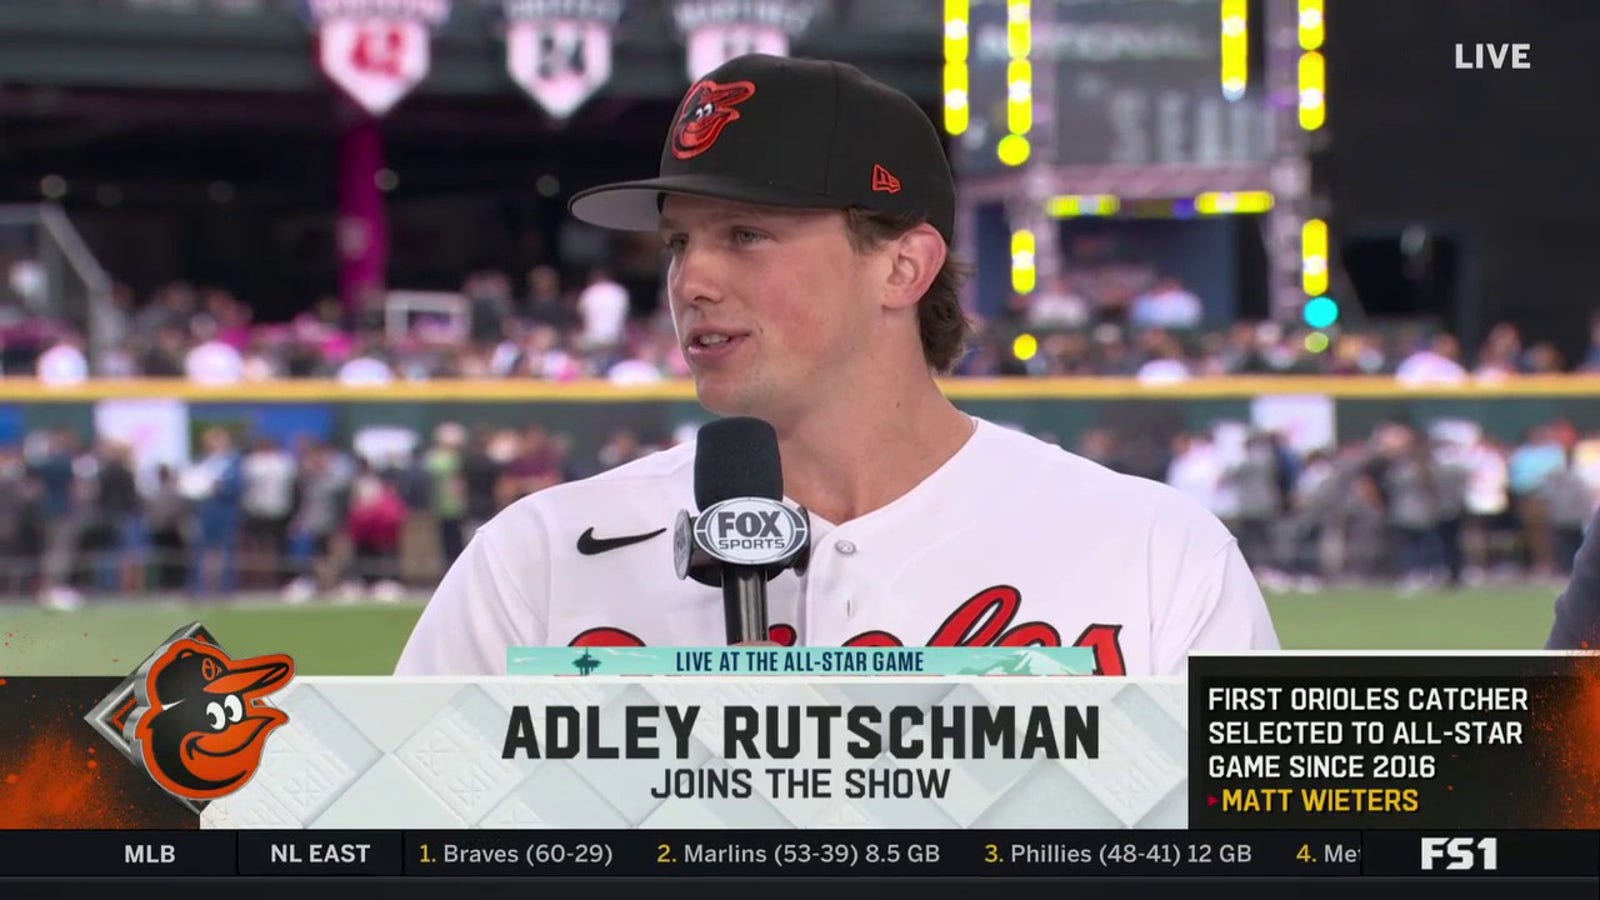 Adley Rutschman played baseball all four years he attended